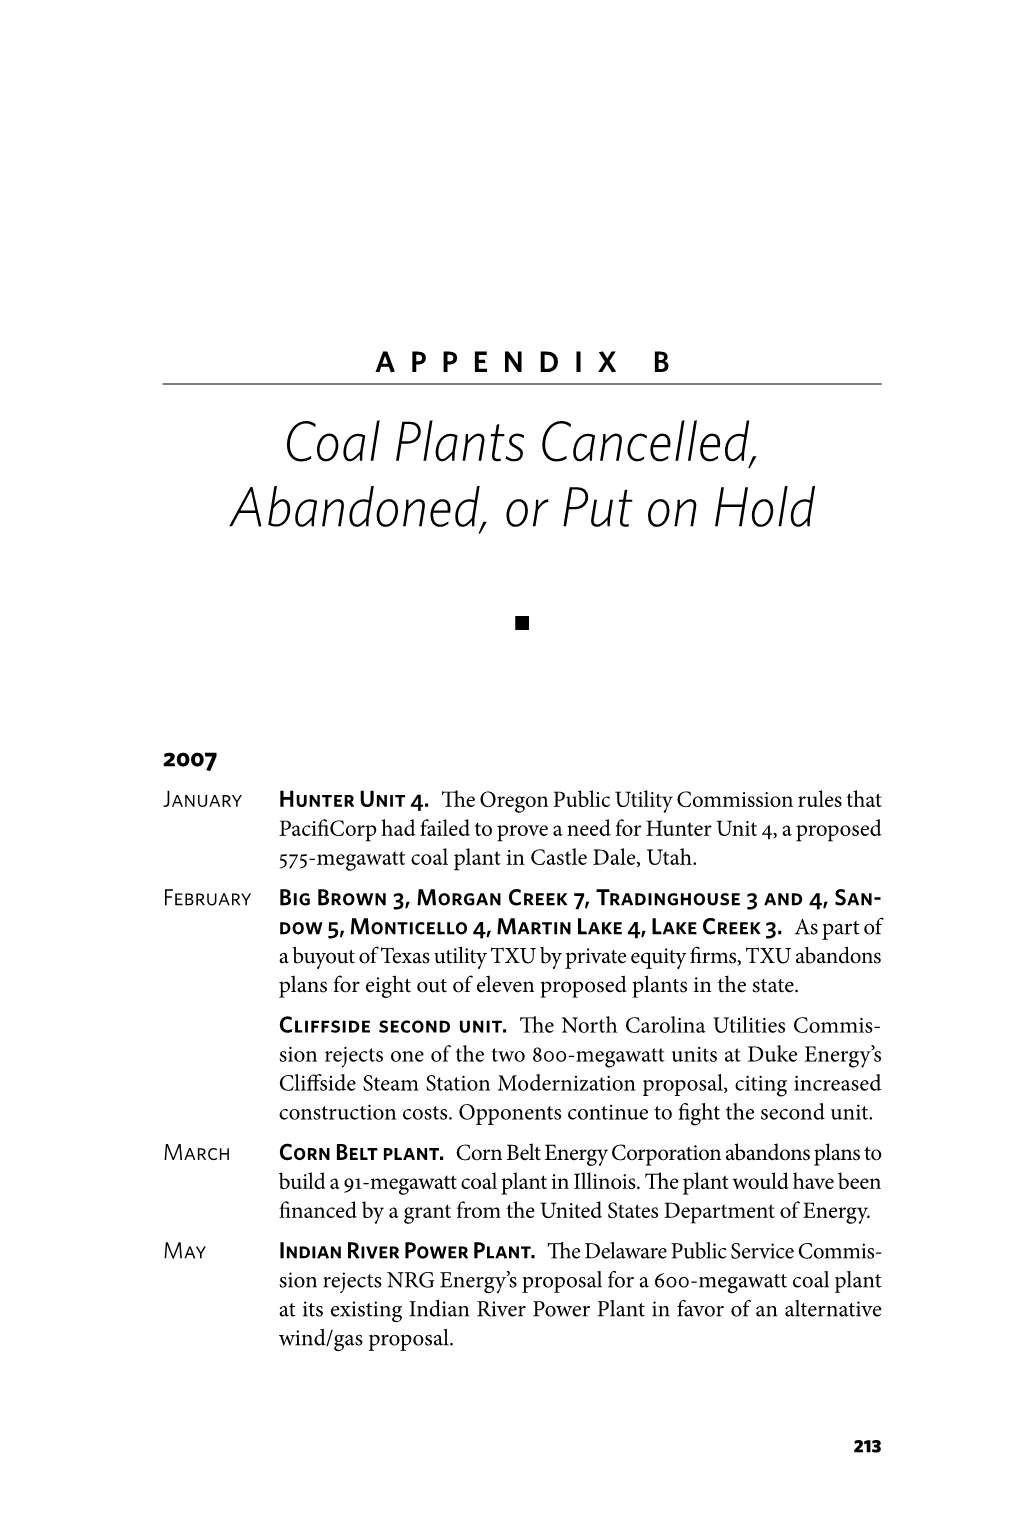 Coal Plants Cancelled, Abandoned, Or Put on Hold